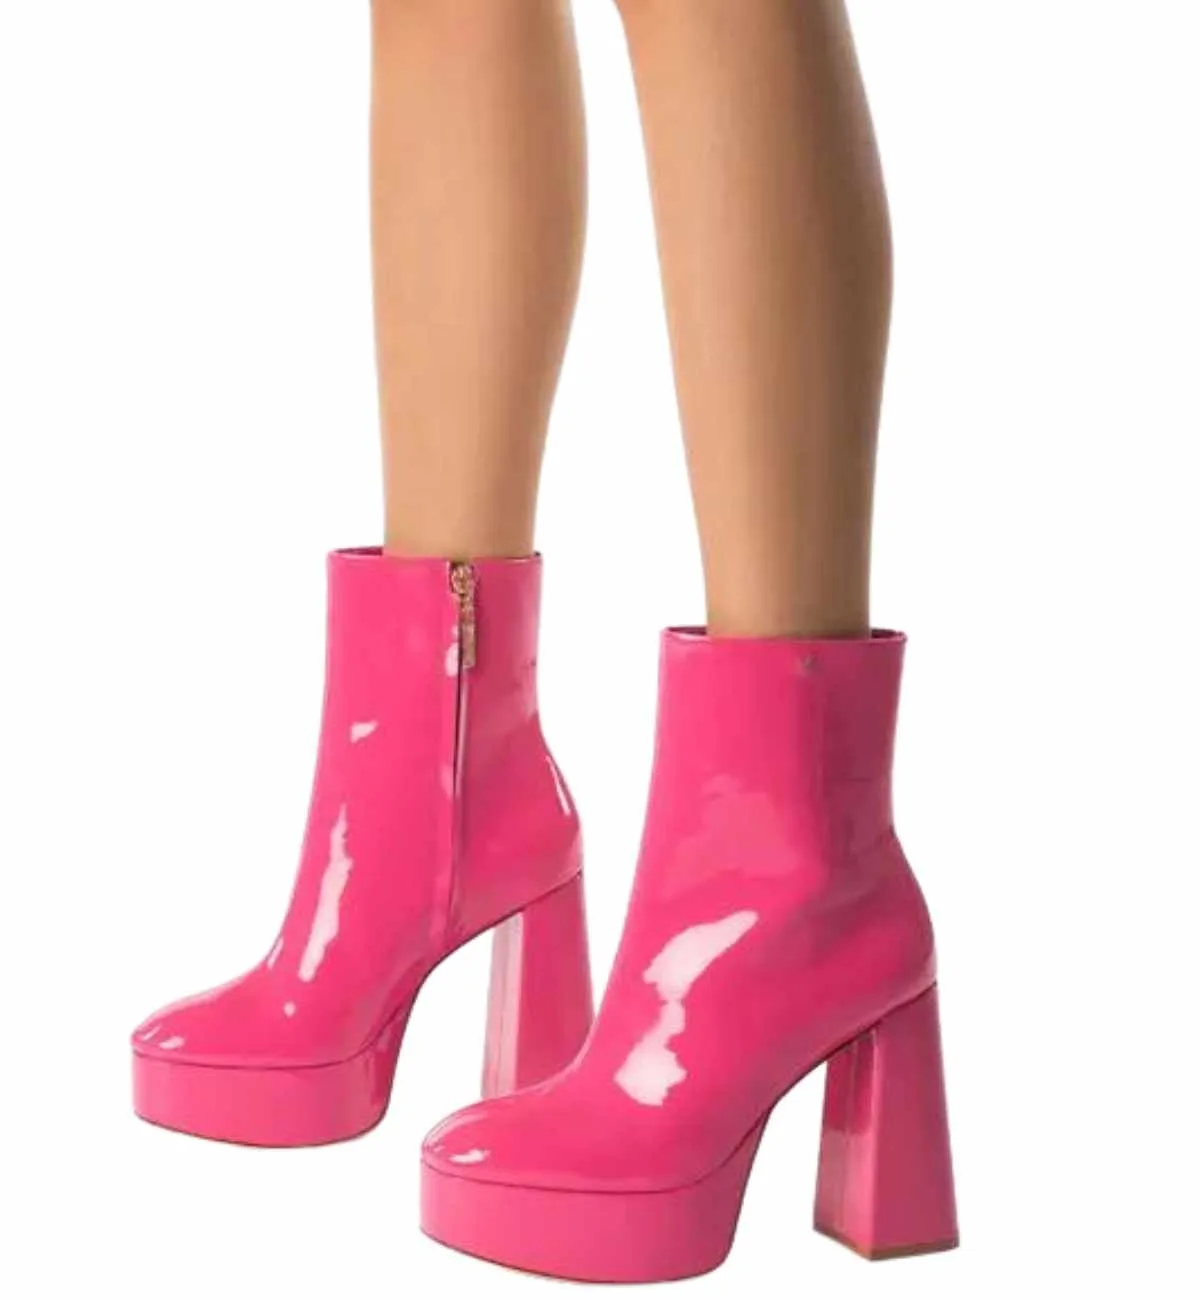 Woman's legs in Hot Pink Barbie Core Fashion Patent Platform Booties on white background.